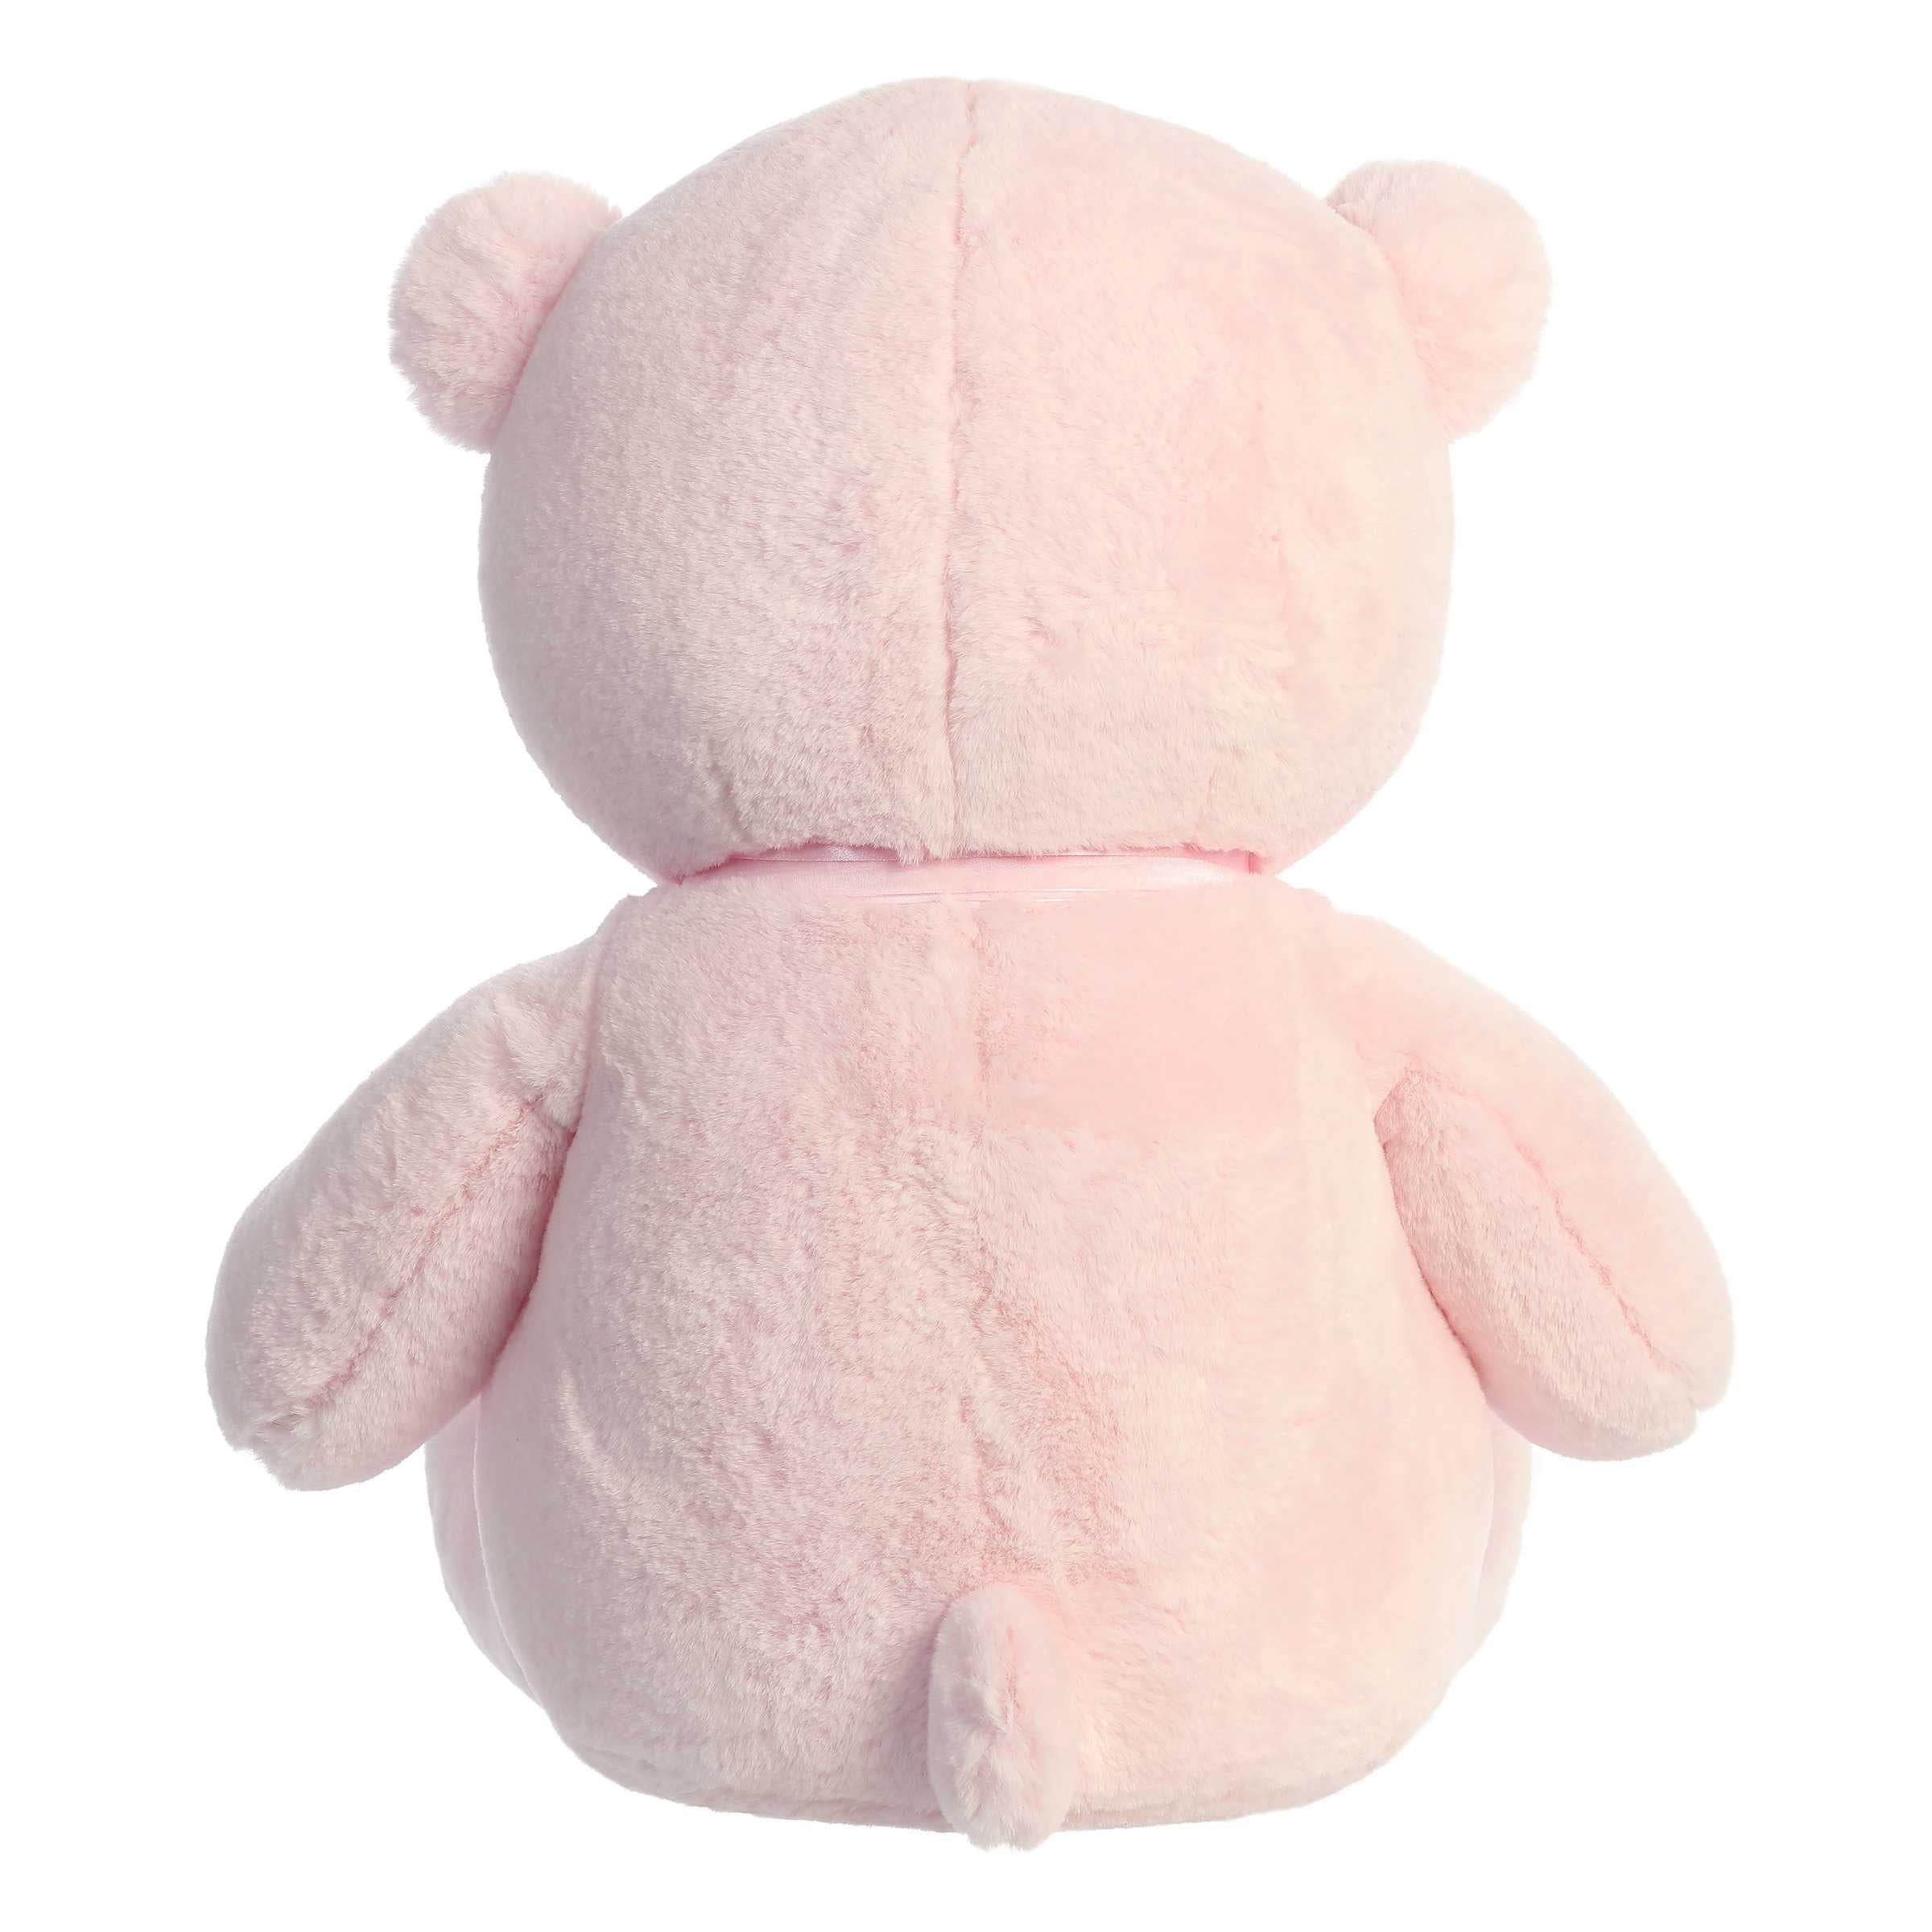 ebba™ - My First Teddy™ - 28" Pink